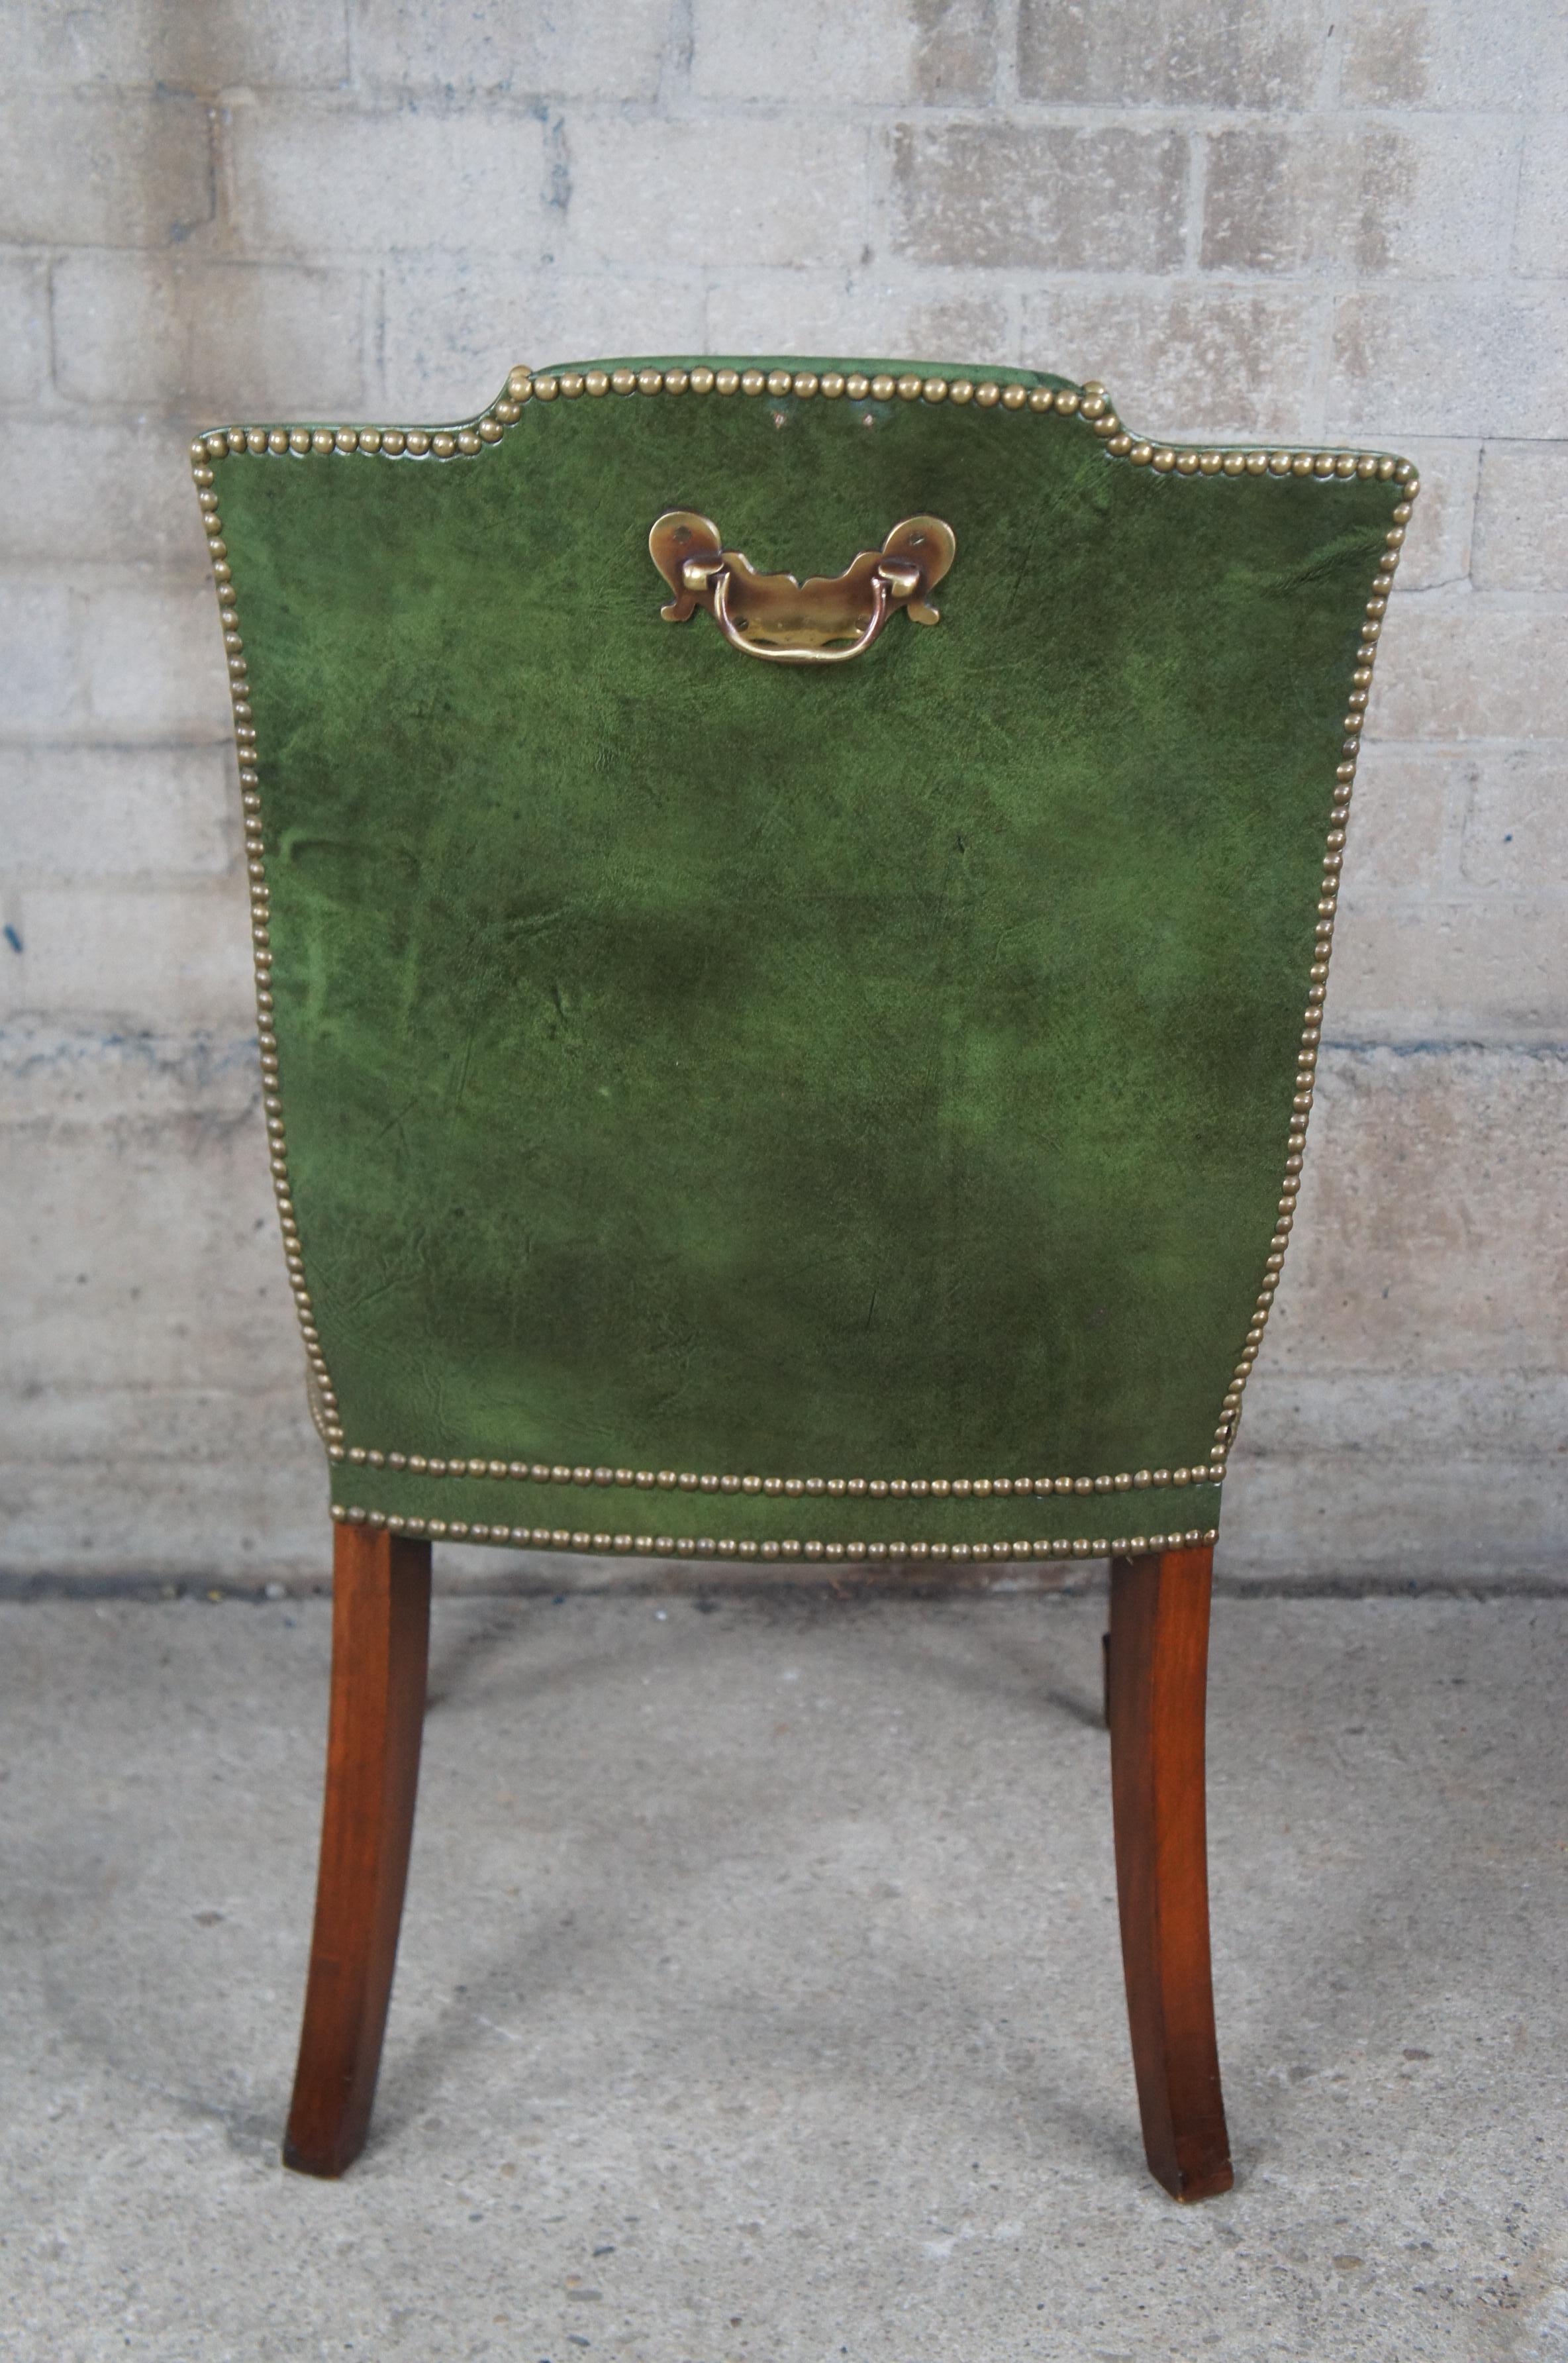 20th Century Drexel Heritage Midcentury Sheraton Mahogany Green Leather Tufted Side Chair For Sale